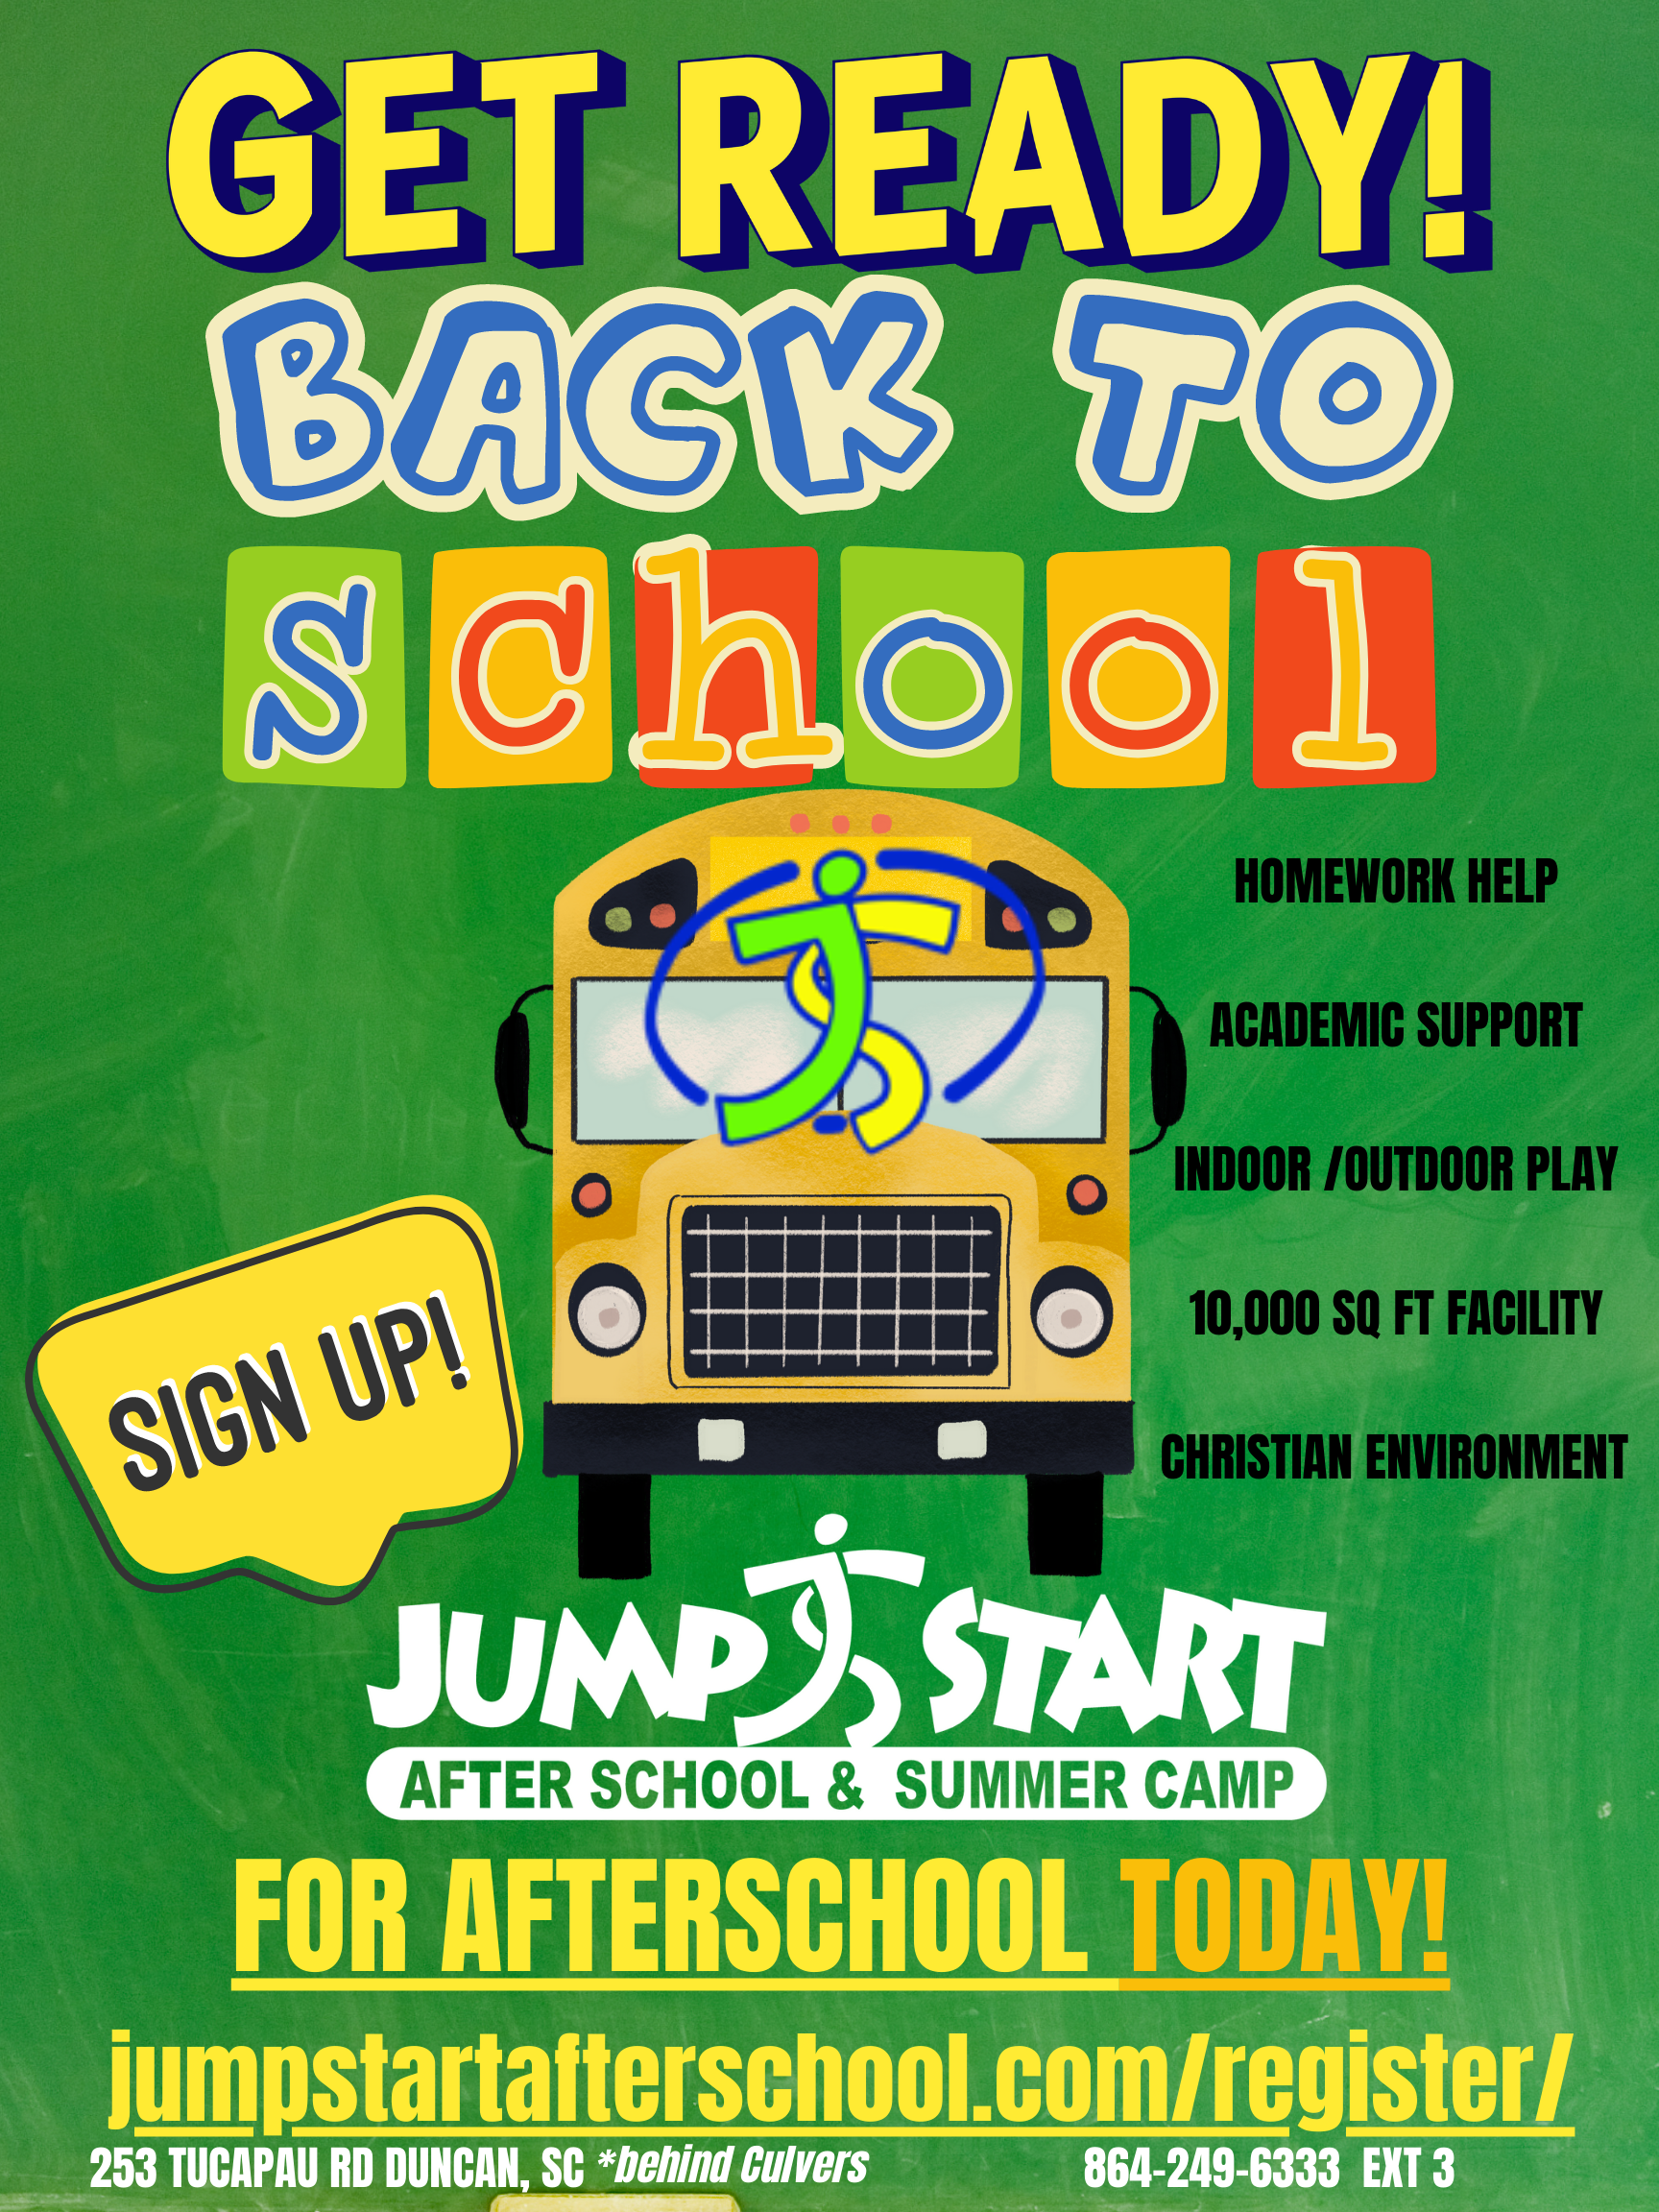 Back-to-School-Sign-Up-for-After-School-Bus-Jump-Start.png